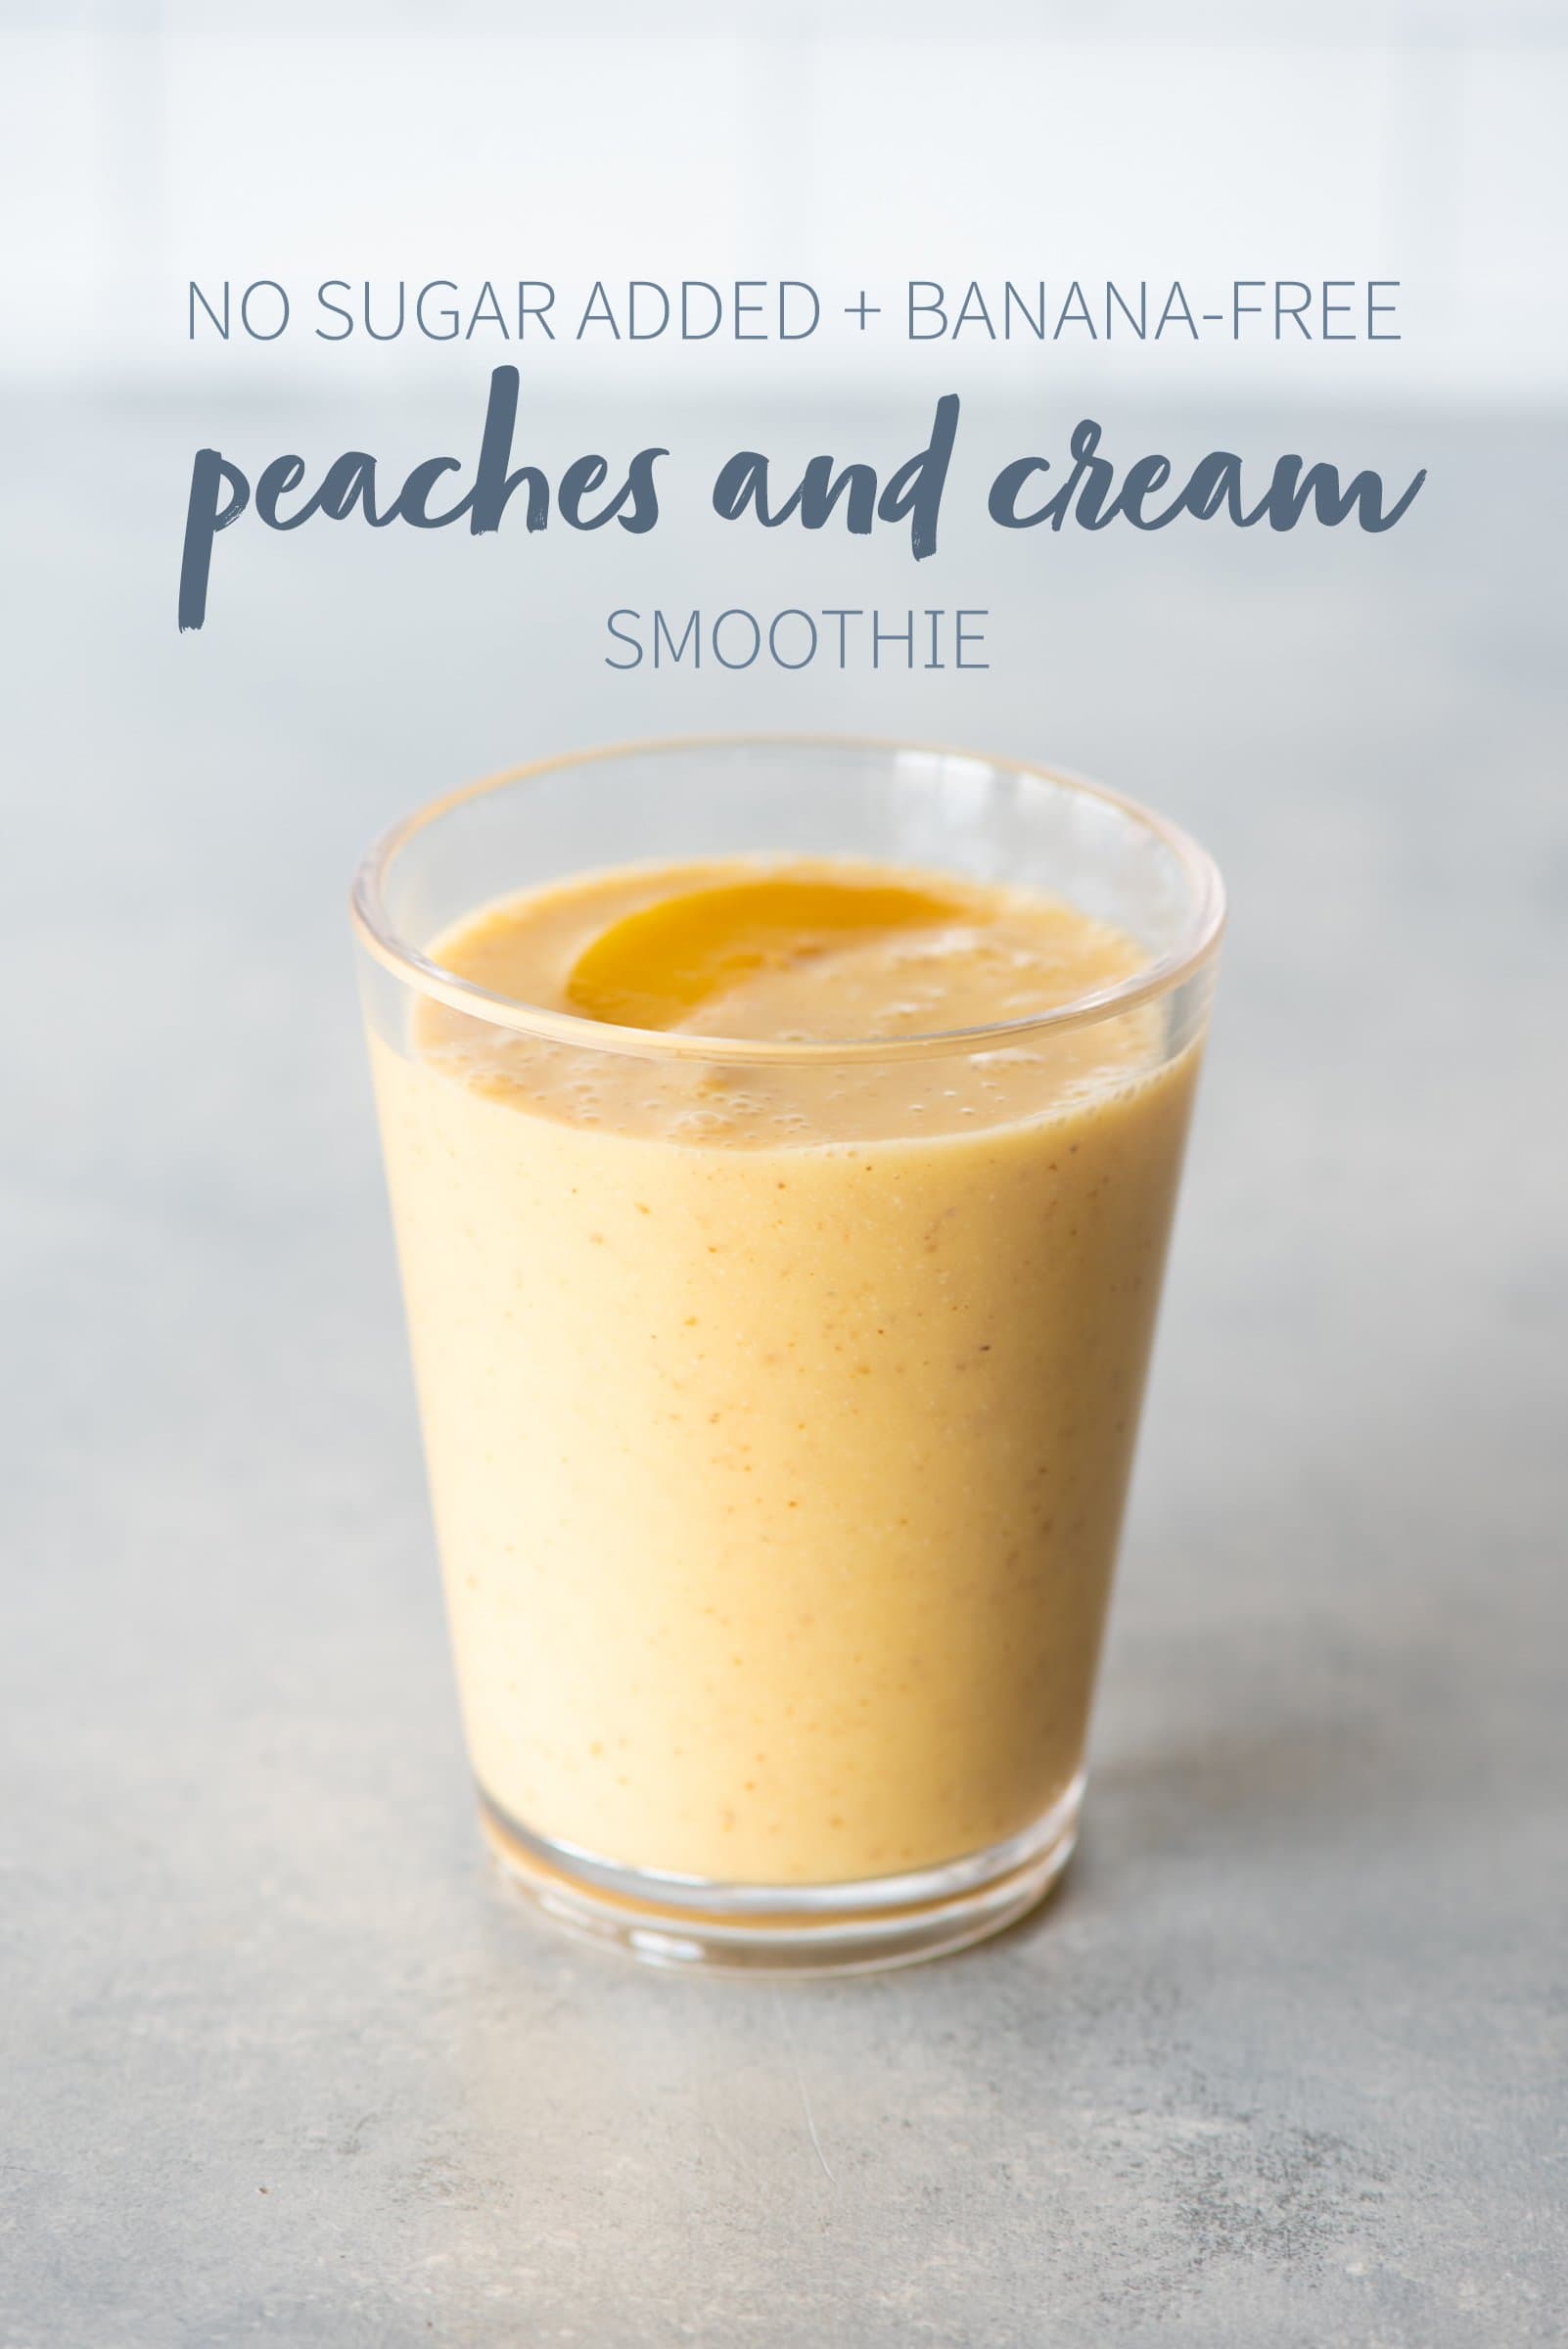 Peaches and cream smoothie in a clear glass topped with sliced peaches. A text overlay reads "No Sugar Added + Banana-Free Peaches and Cream Smoothie."